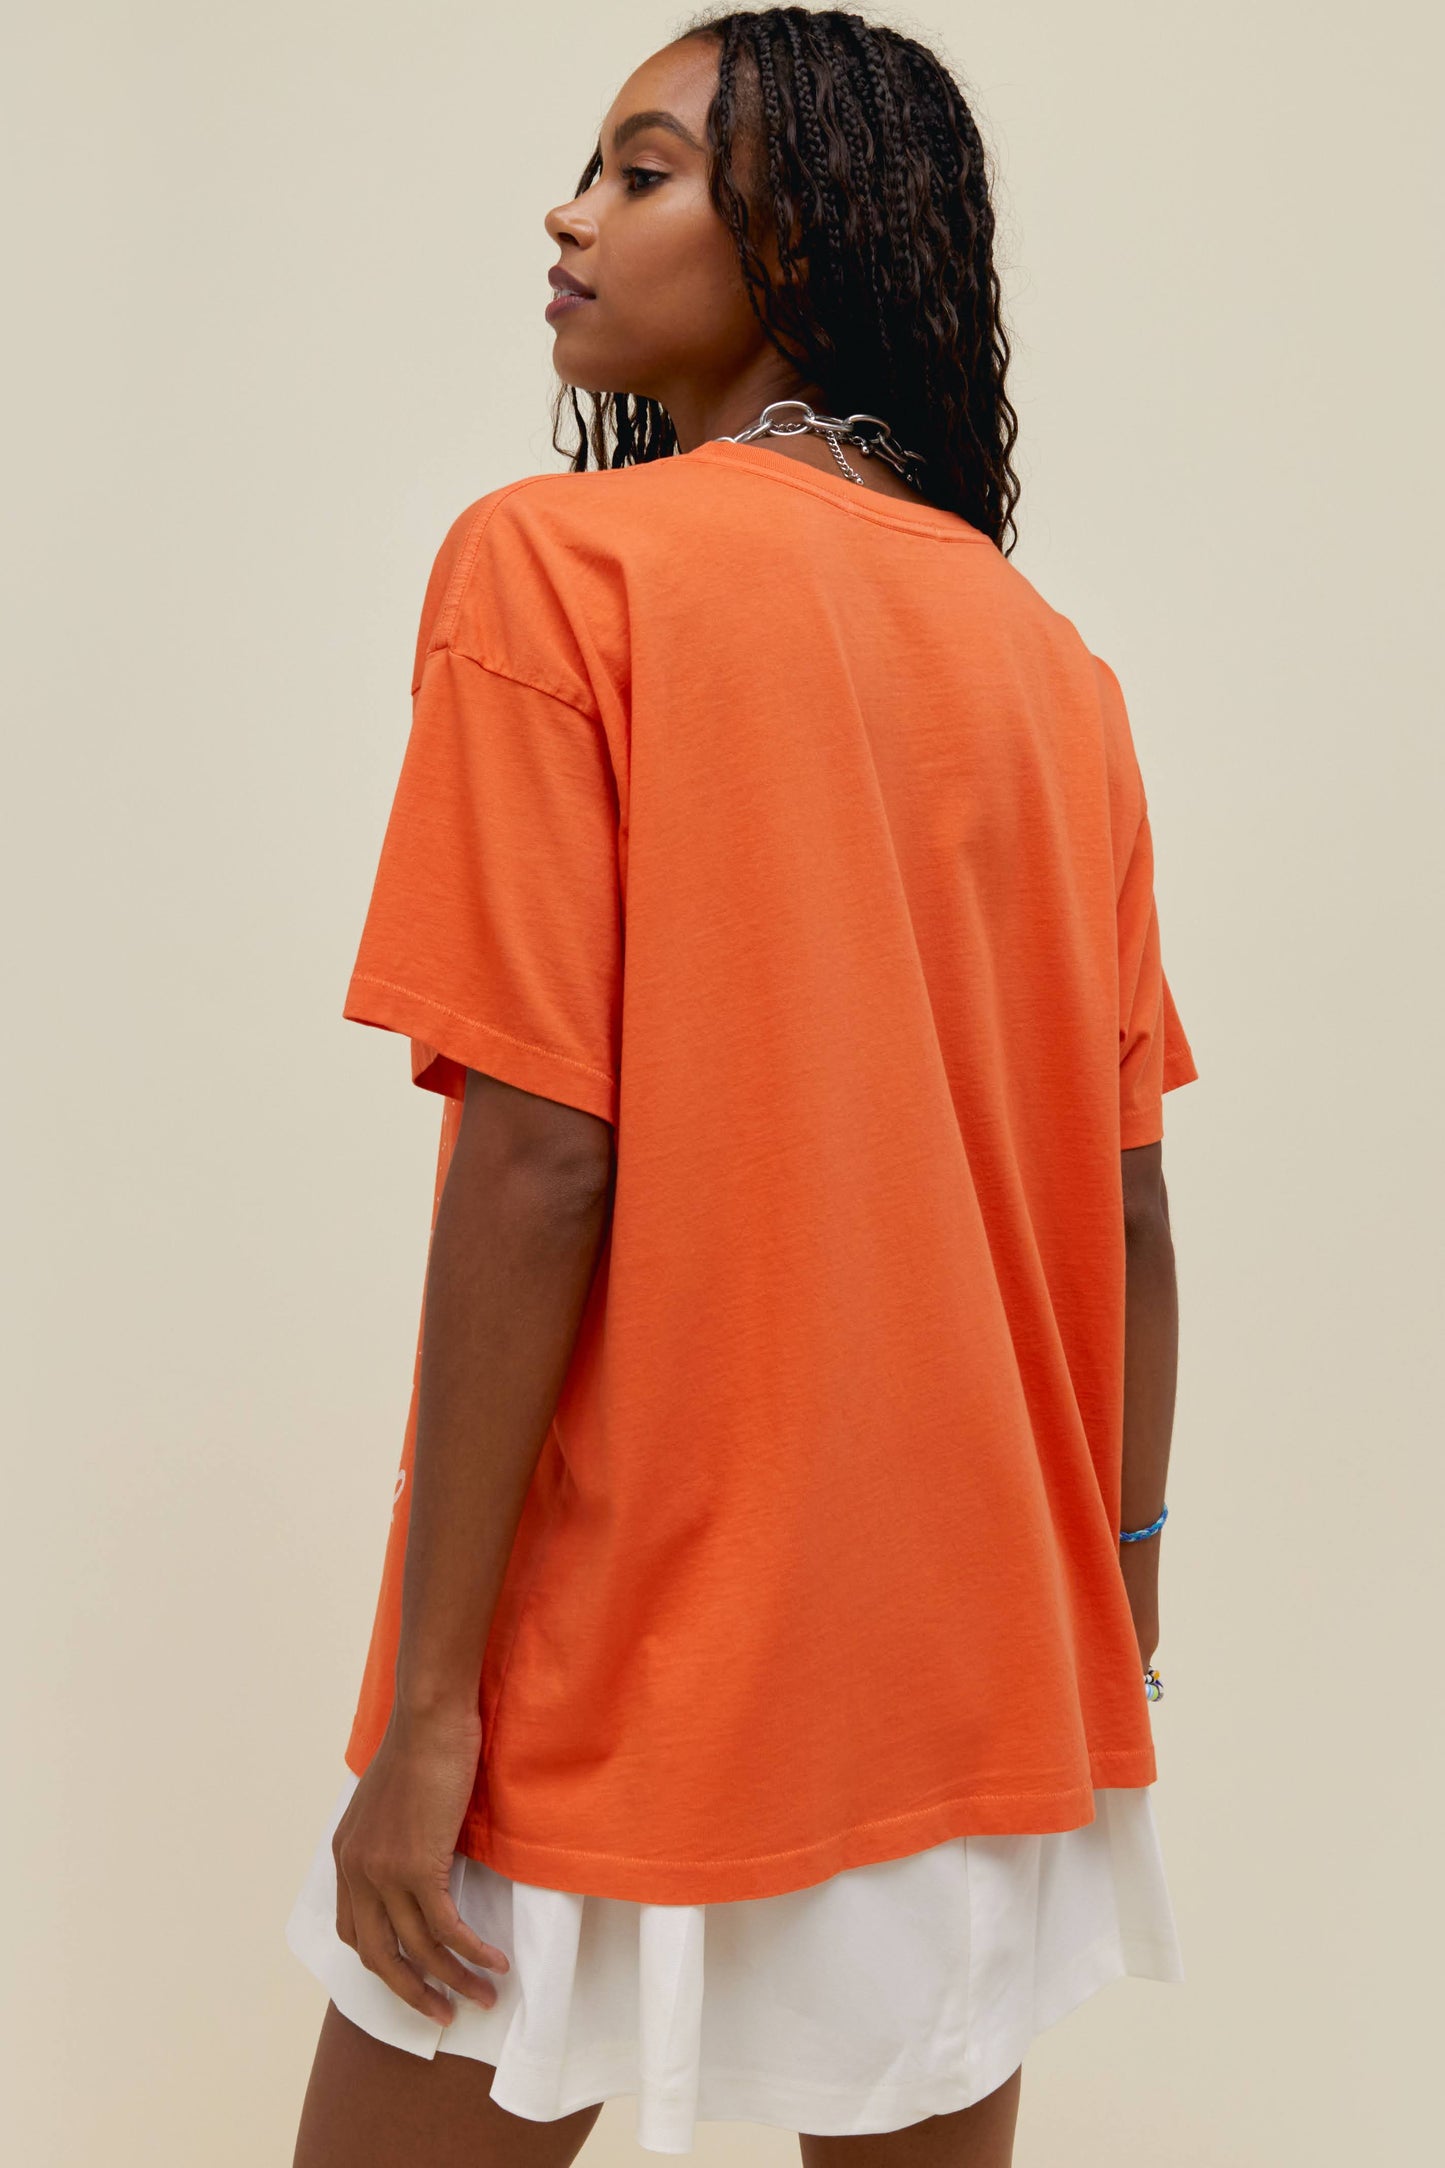 A dark-haired model featuring an orange tee stamped with "Elton John" on the upper part of the tshirt centered with a graphic image of Elton John on his 1977 tour